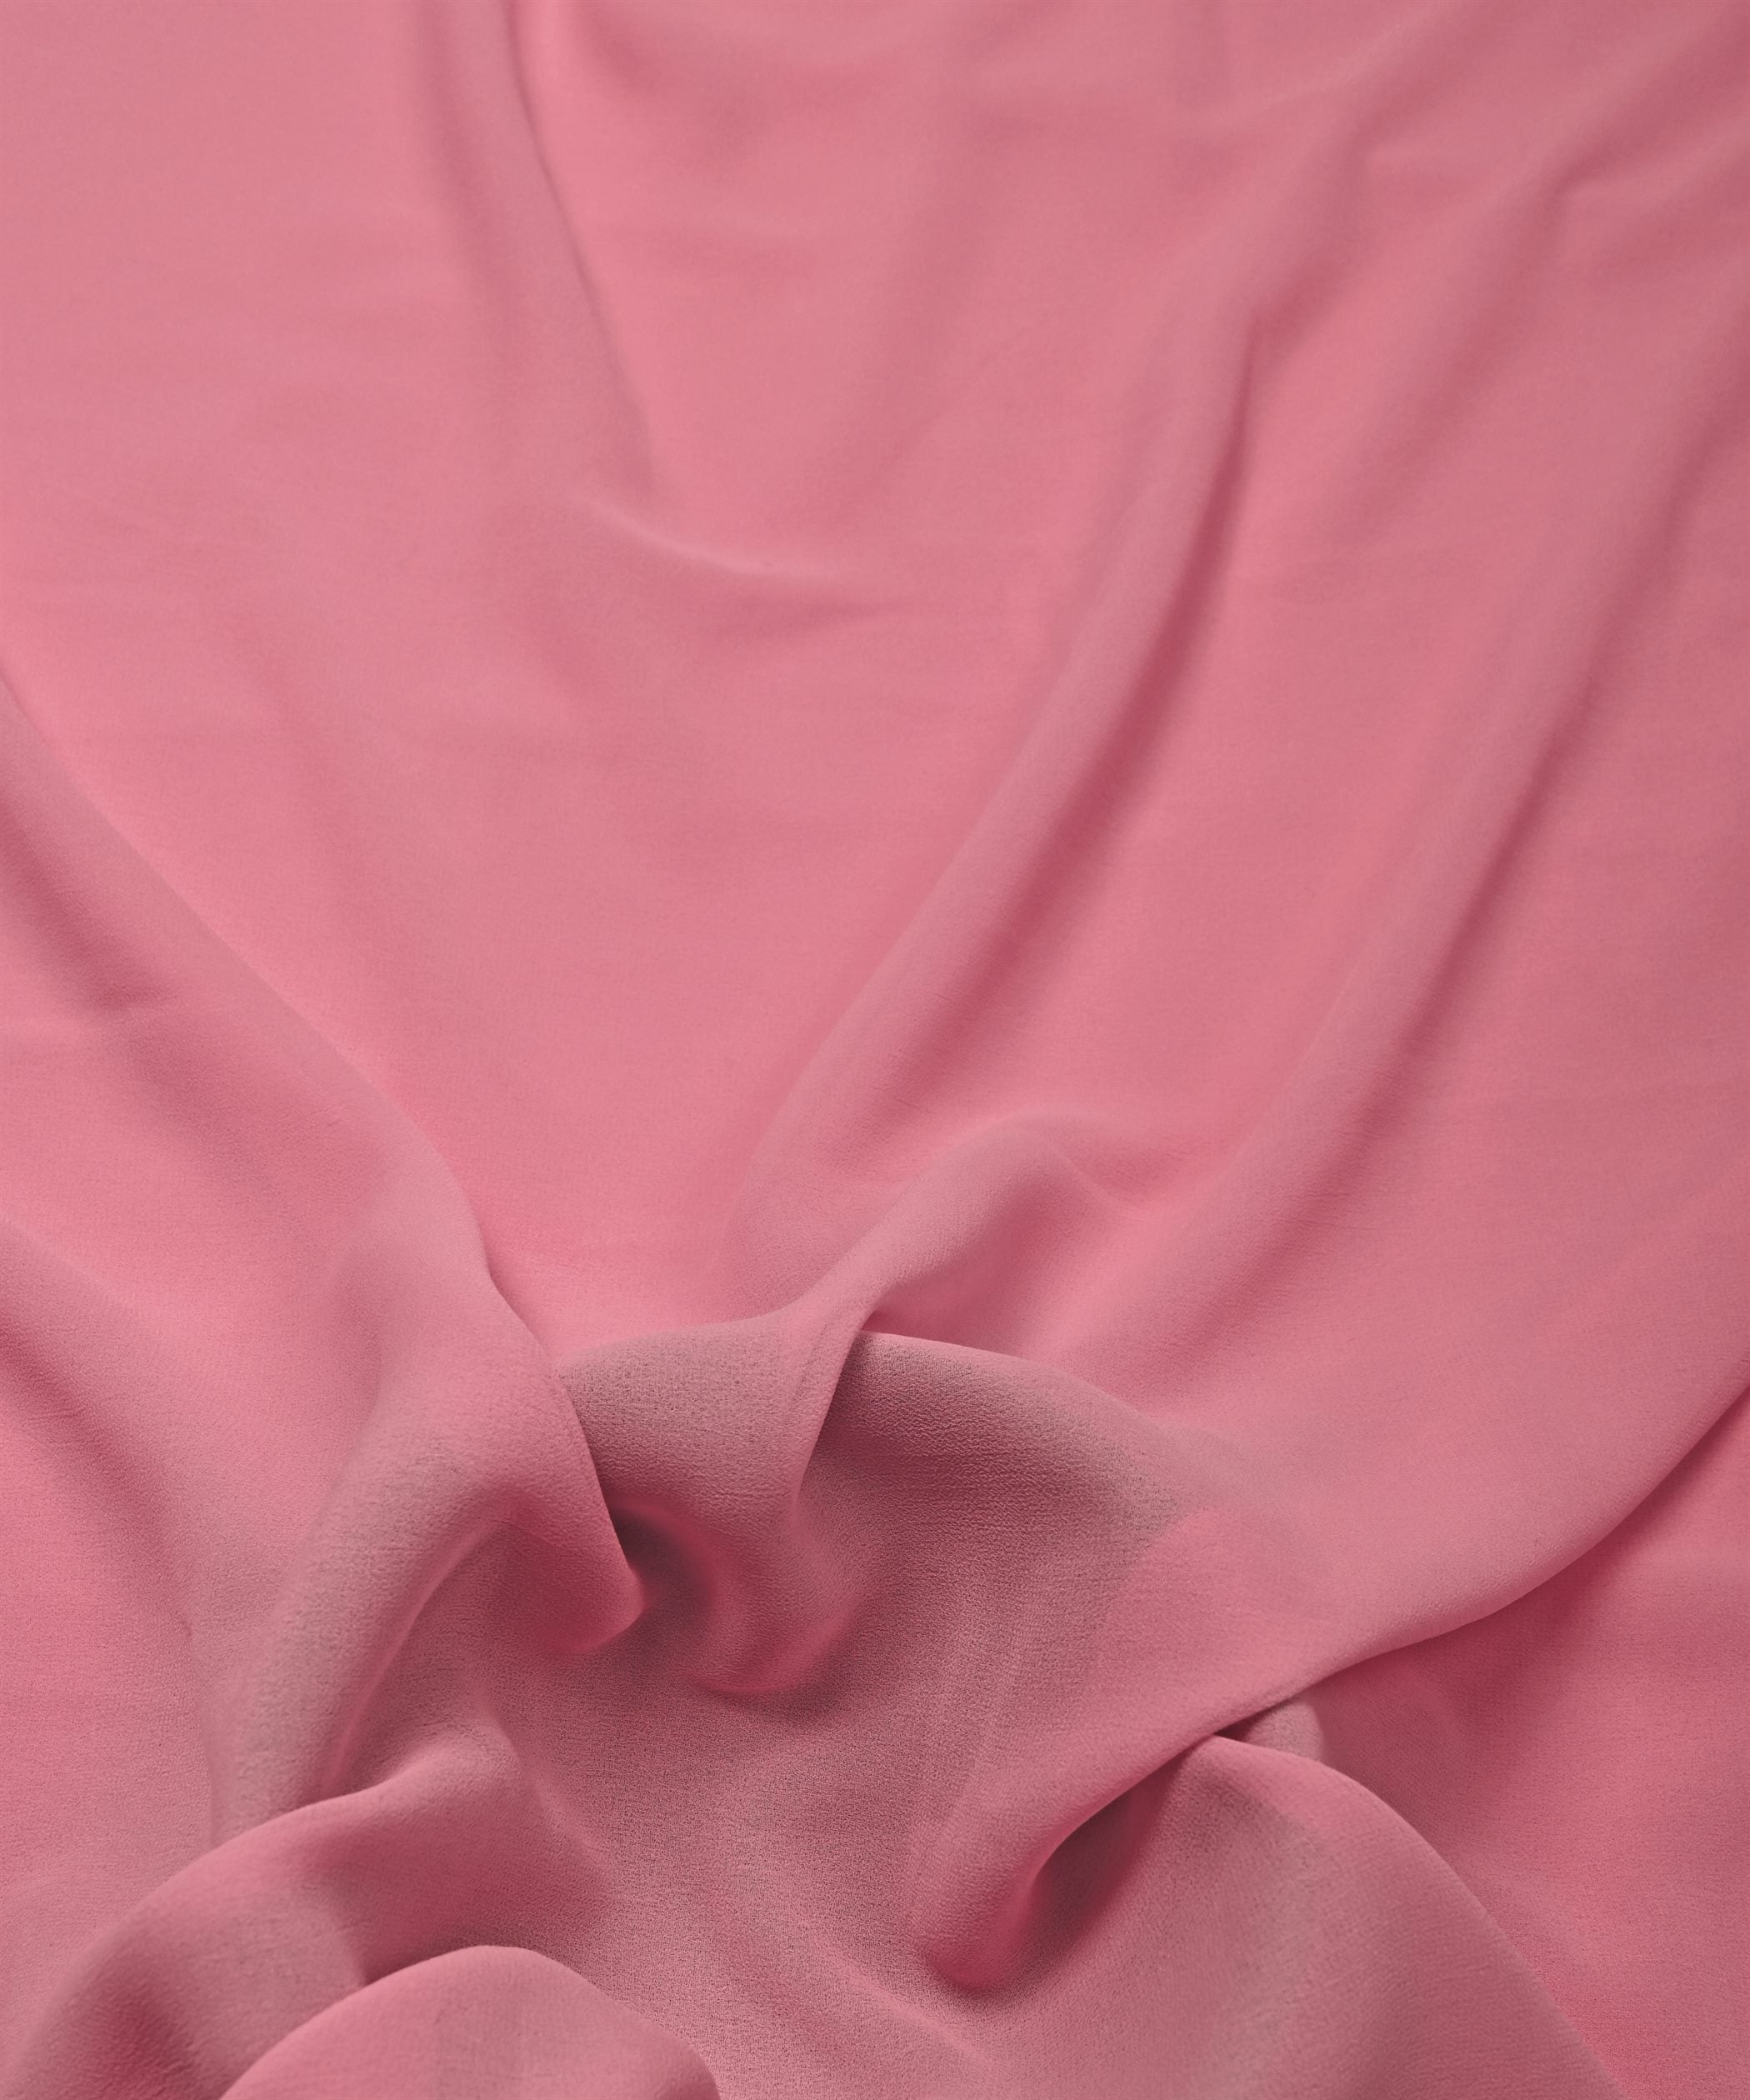 Light Coral Plain Dyed Georgette (60 Grams) Fabric